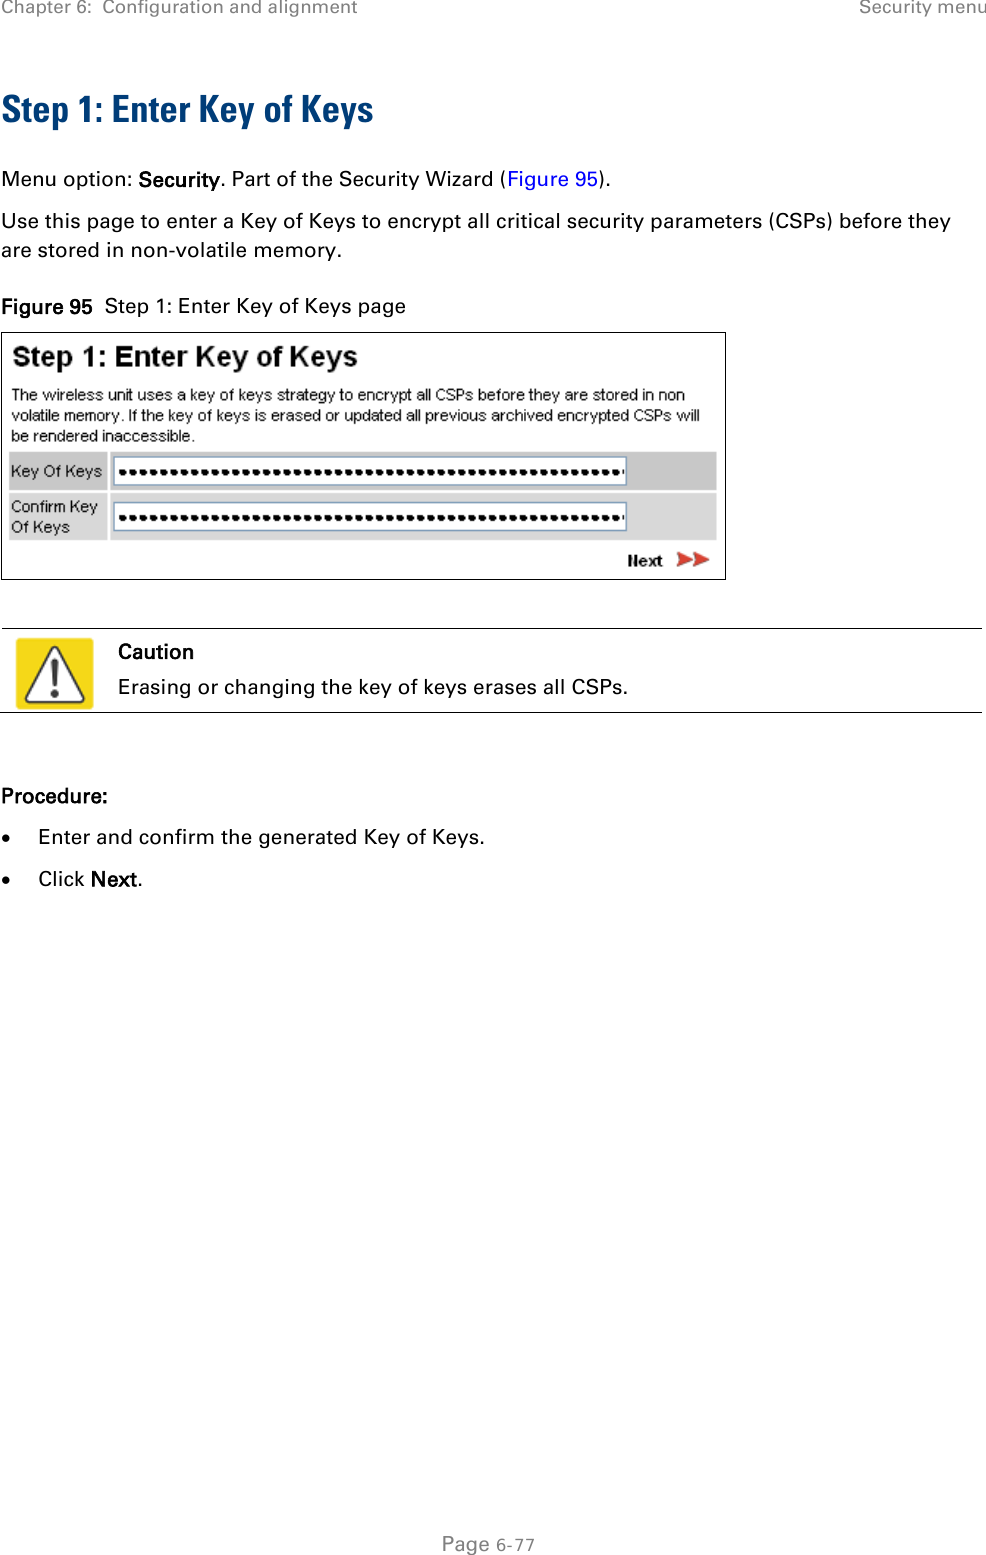 Chapter 6:  Configuration and alignment Security menu  Step 1: Enter Key of Keys Menu option: Security. Part of the Security Wizard (Figure 95). Use this page to enter a Key of Keys to encrypt all critical security parameters (CSPs) before they are stored in non-volatile memory. Figure 95  Step 1: Enter Key of Keys page    Caution Erasing or changing the key of keys erases all CSPs.  Procedure: • Enter and confirm the generated Key of Keys. • Click Next.  Page 6-77 